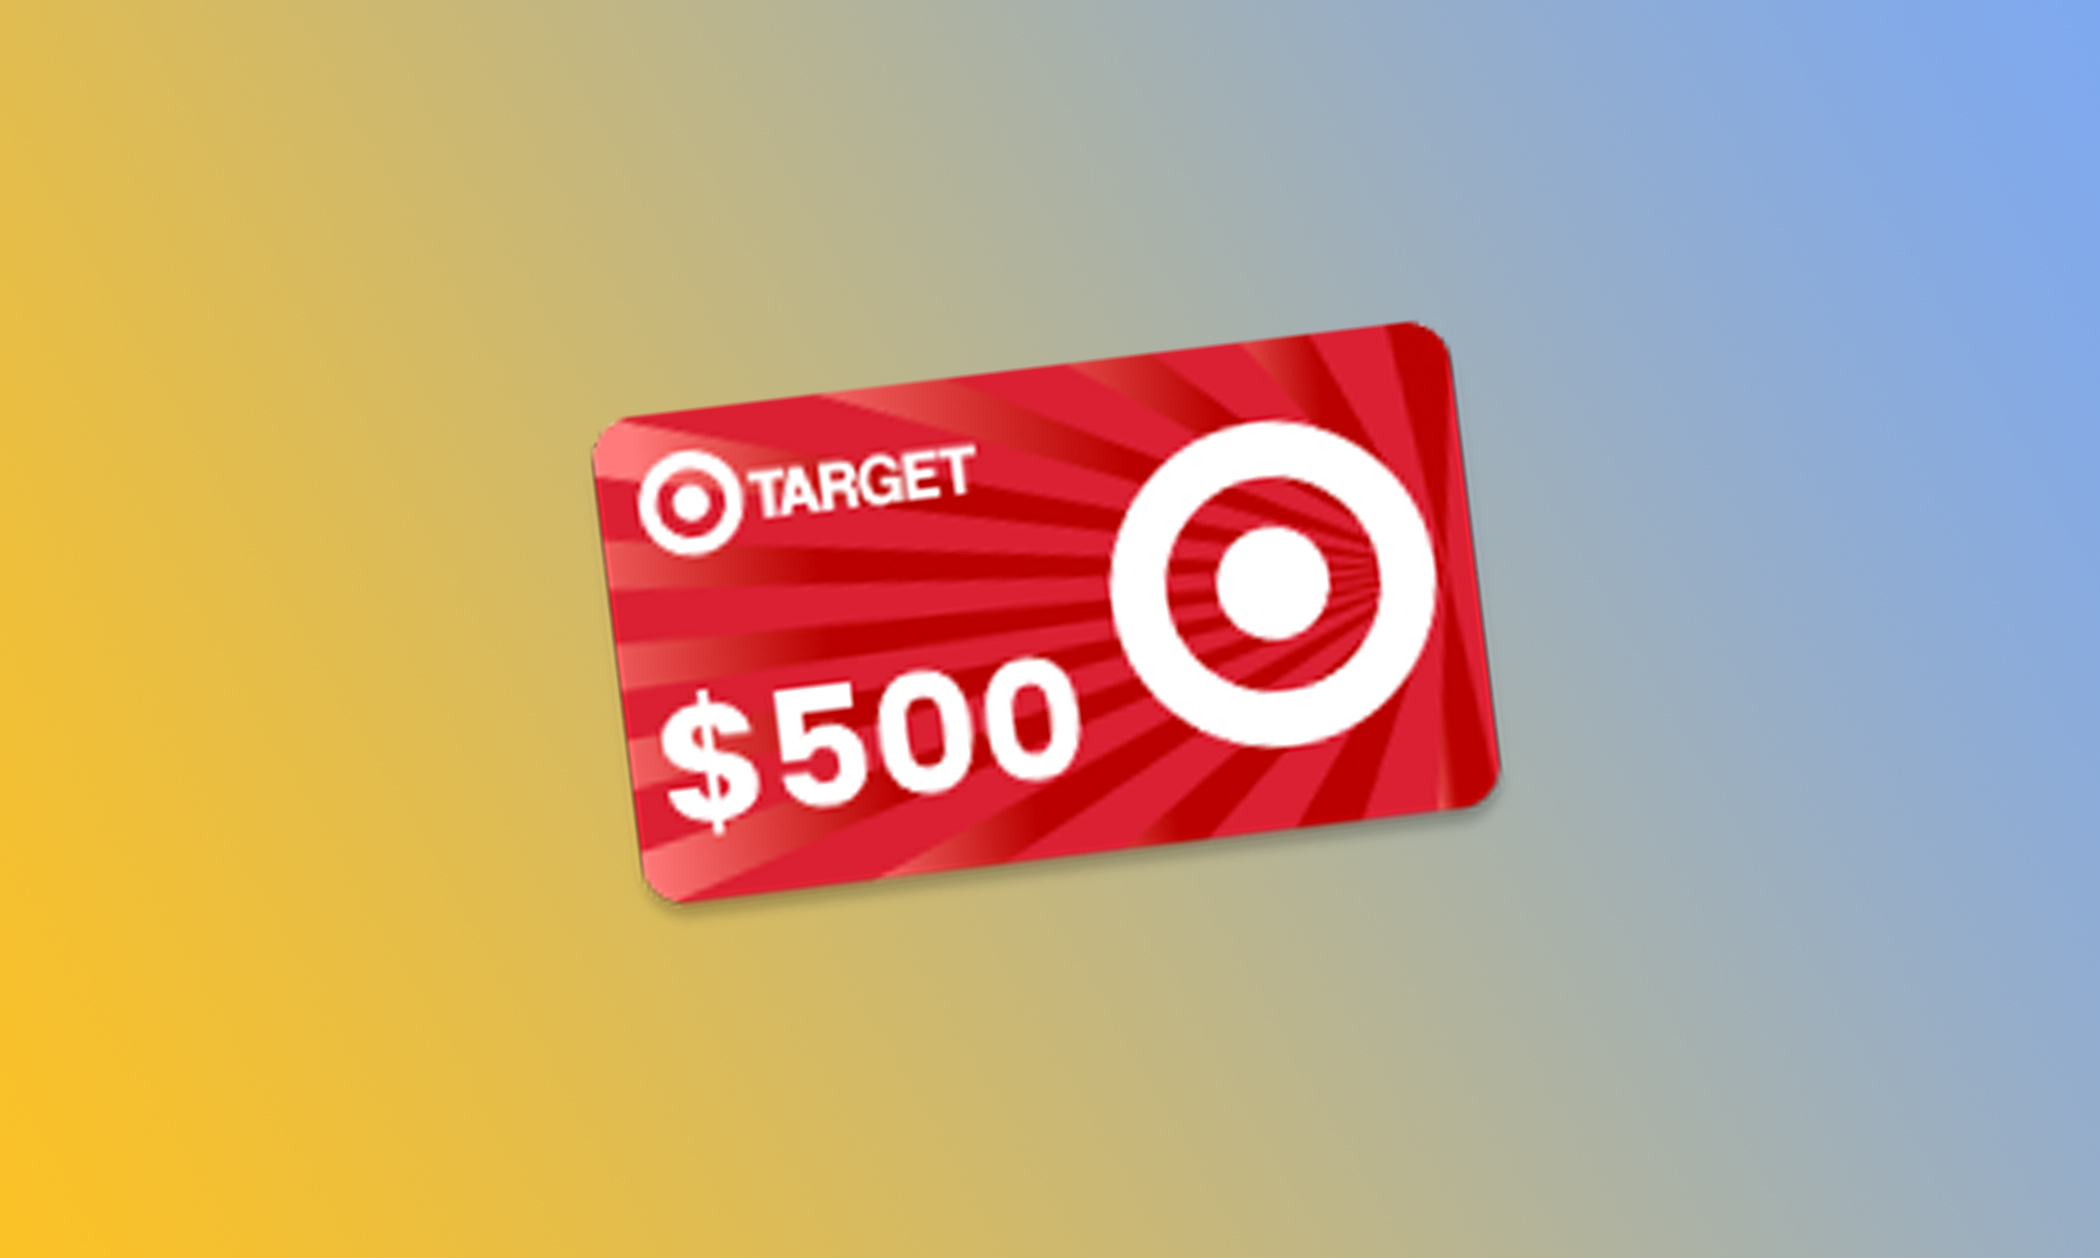 enter-to-win-a-500-target-gift-card-okwow-sweepstakes-and-giveaways